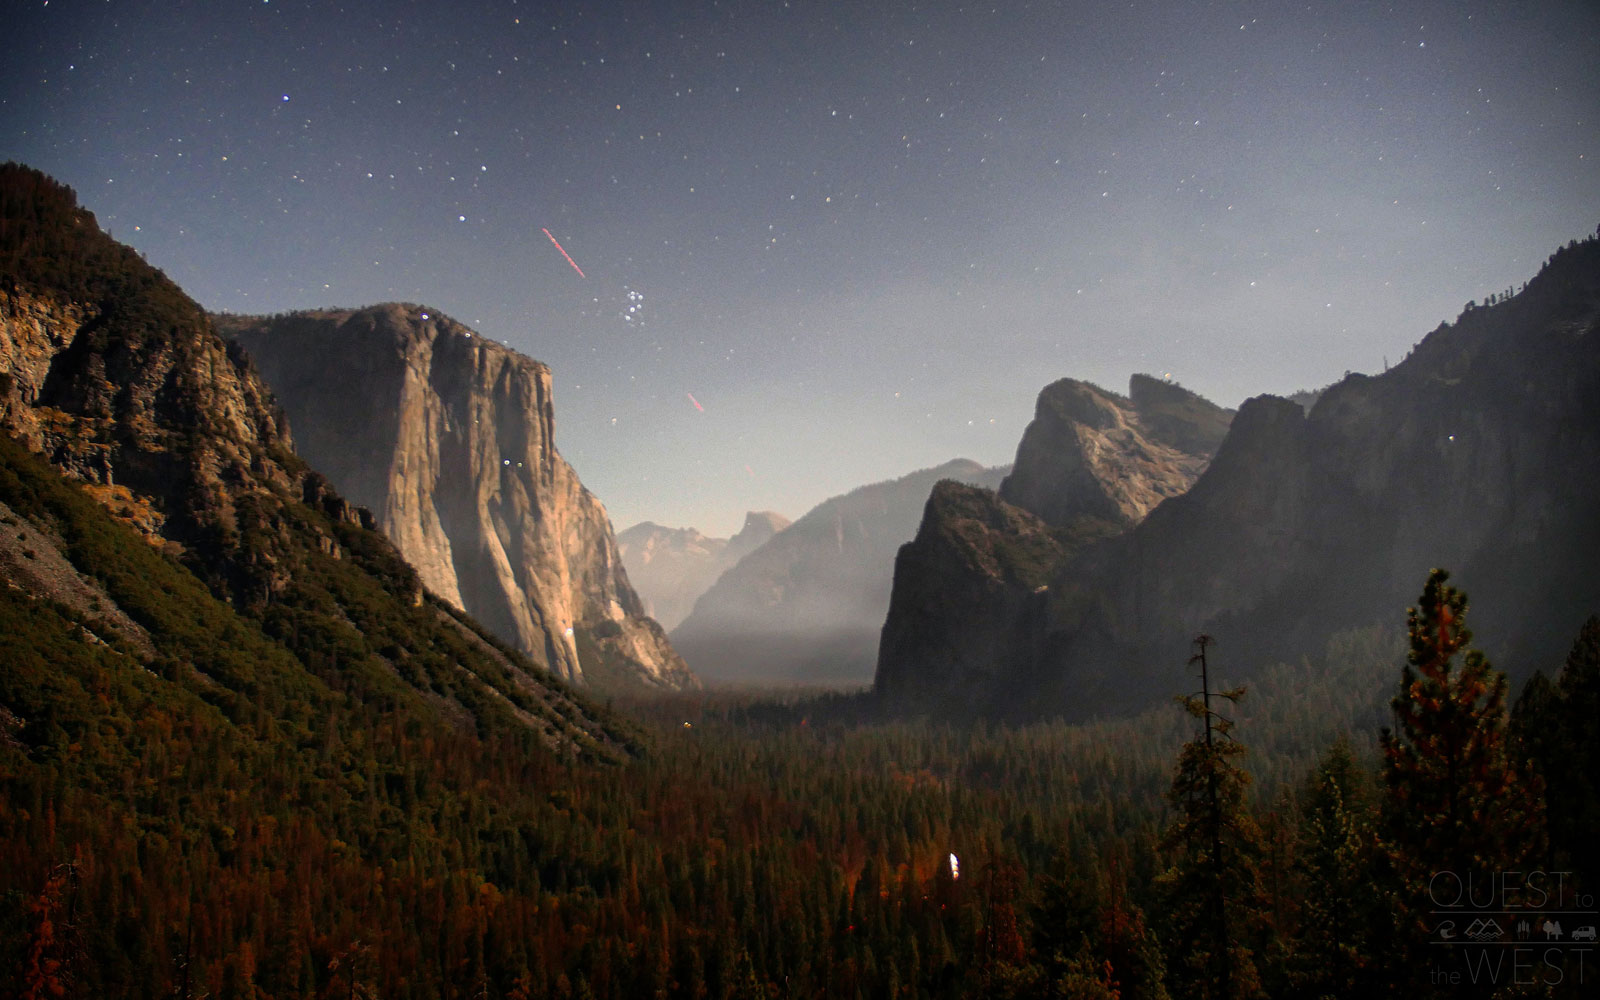 Paquette found that admiring California’s Yosemite National Park at nighttime gives a view most tourists rarely see.
                              “You look up in the sky and there’s just all these stars, but you’ve also got a little bit of light that comes in from a village that’s near campgrounds as light peeks in from the trees, and from the distance you can see mountain climbers scaling up and down El Capitan with their headlamps, but it feels like there’s no one out there” Paquette describes.
                              The park has 13 different campgrounds, so you have many options for enjoying the cascading waterfalls, giant sequoias, and vast meadows by day and star-speckled skies during the night.